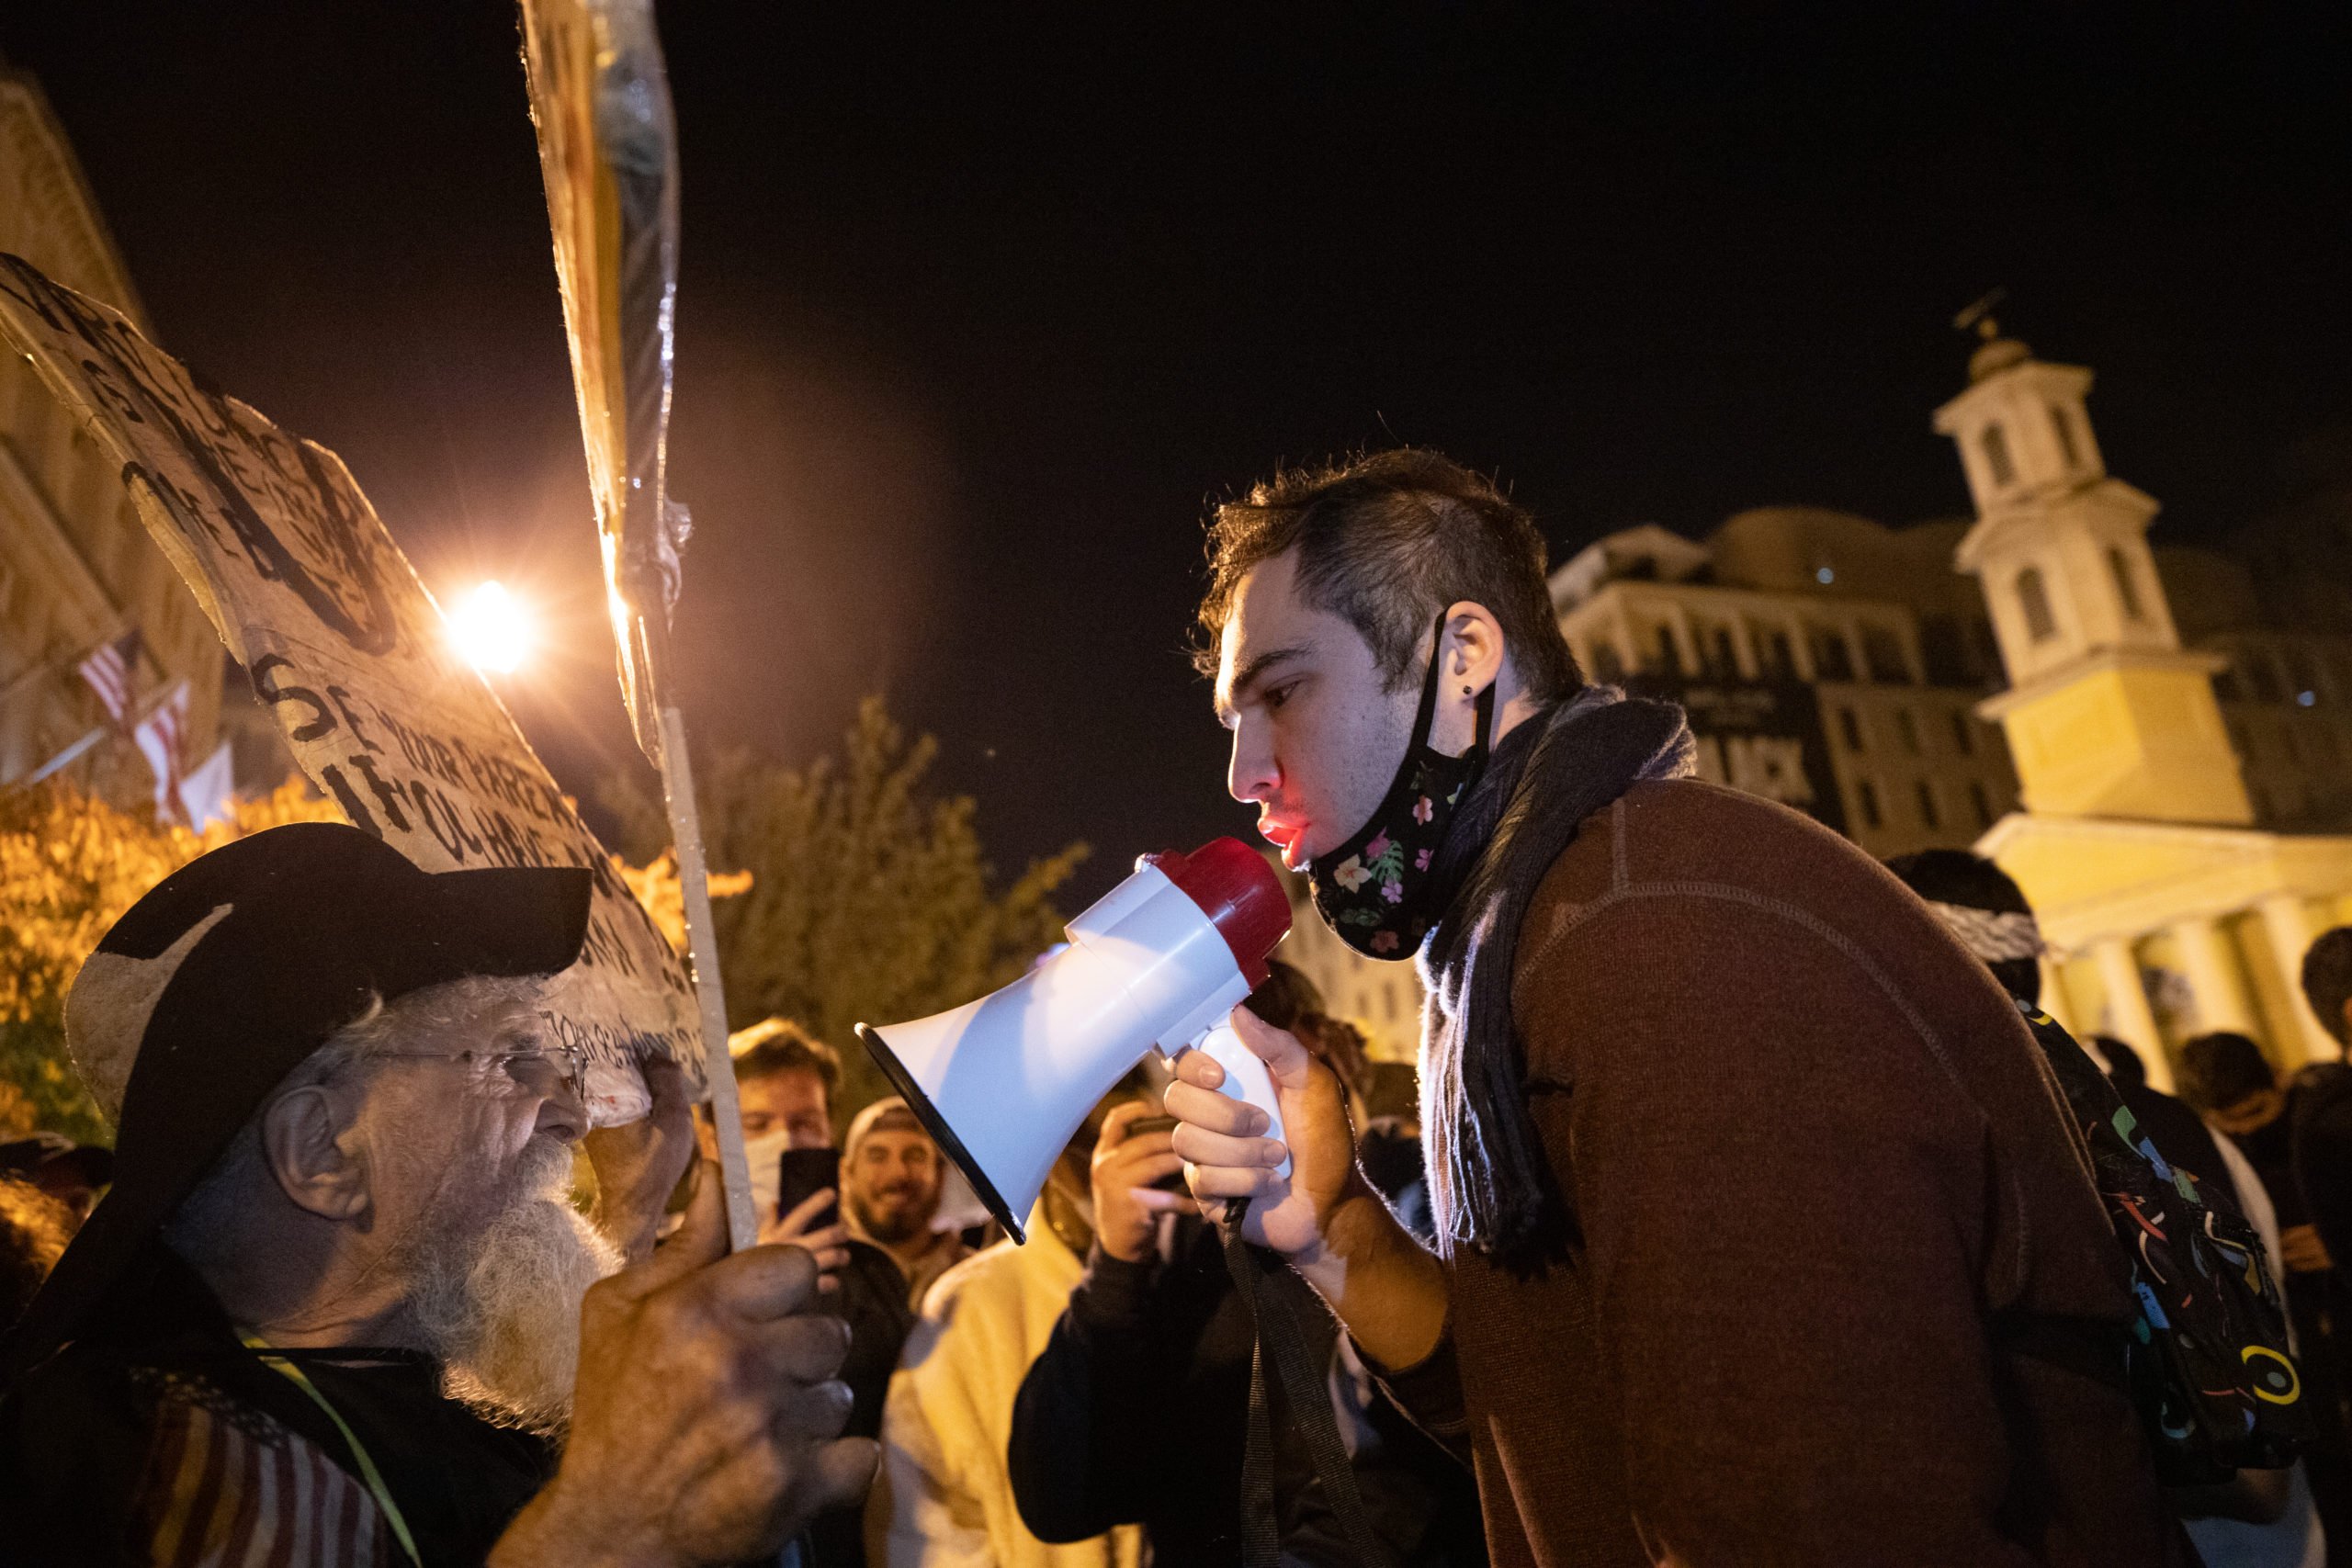 A self-identified Jewish man got in a heated argument with an older man protesting the circumcision of children at Black Lives Matter Plaza in Washington, D.C. on Nov. 7, 2020. (Kaylee Greenlee - Daily Caller News Foundation)